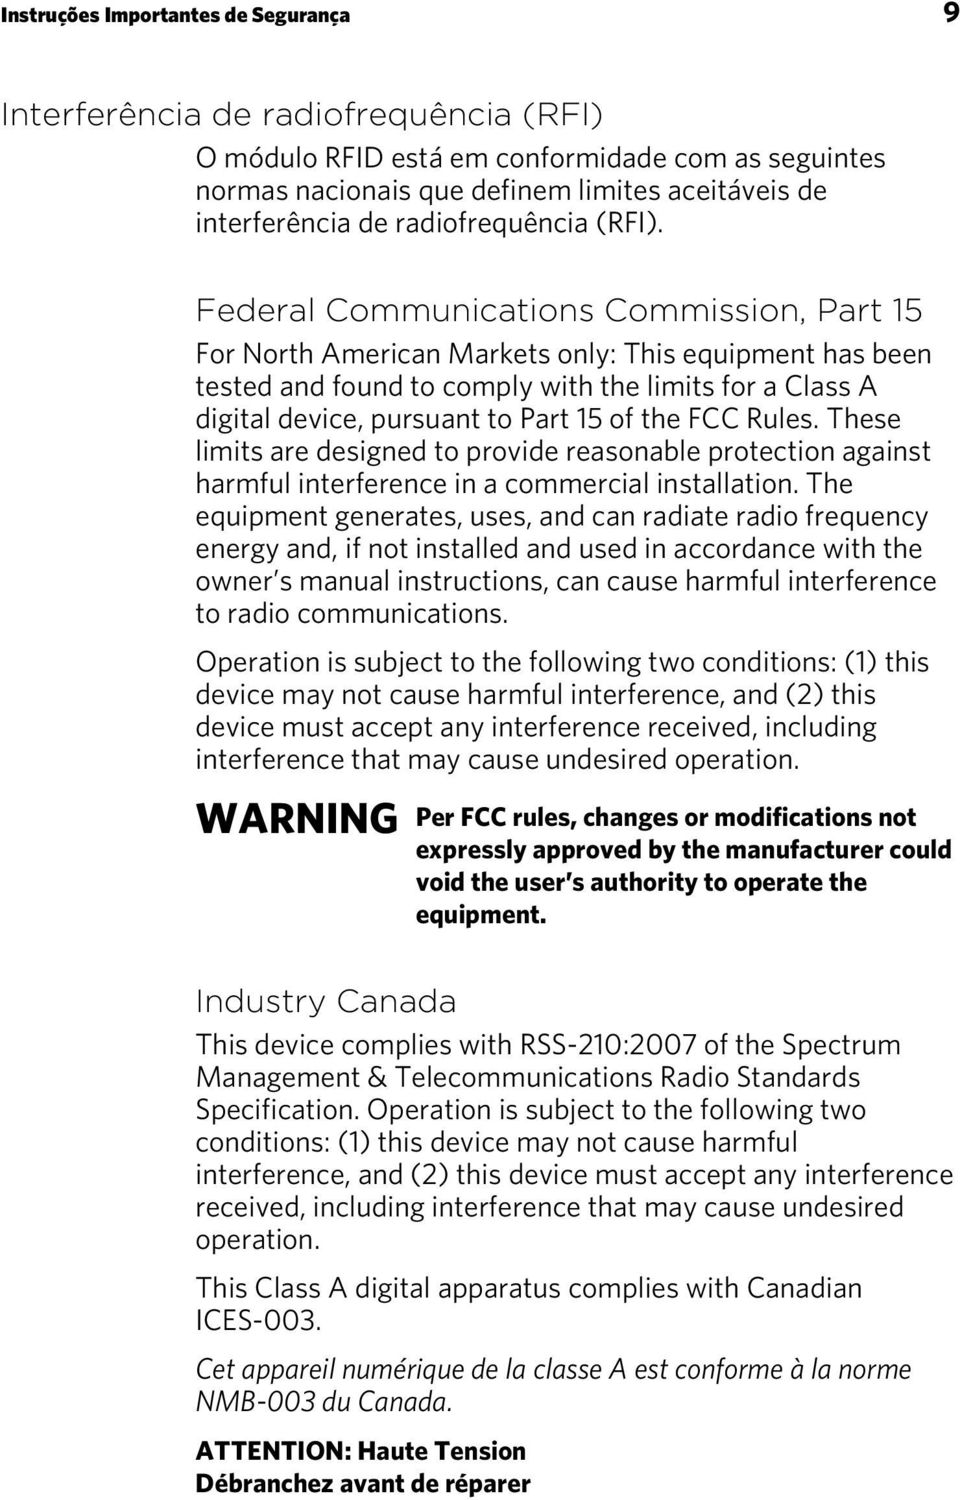 Federal Communications Commission, Part 15 For North American Markets only: This equipment has been tested and found to comply with the limits for a Class A digital device, pursuant to Part 15 of the